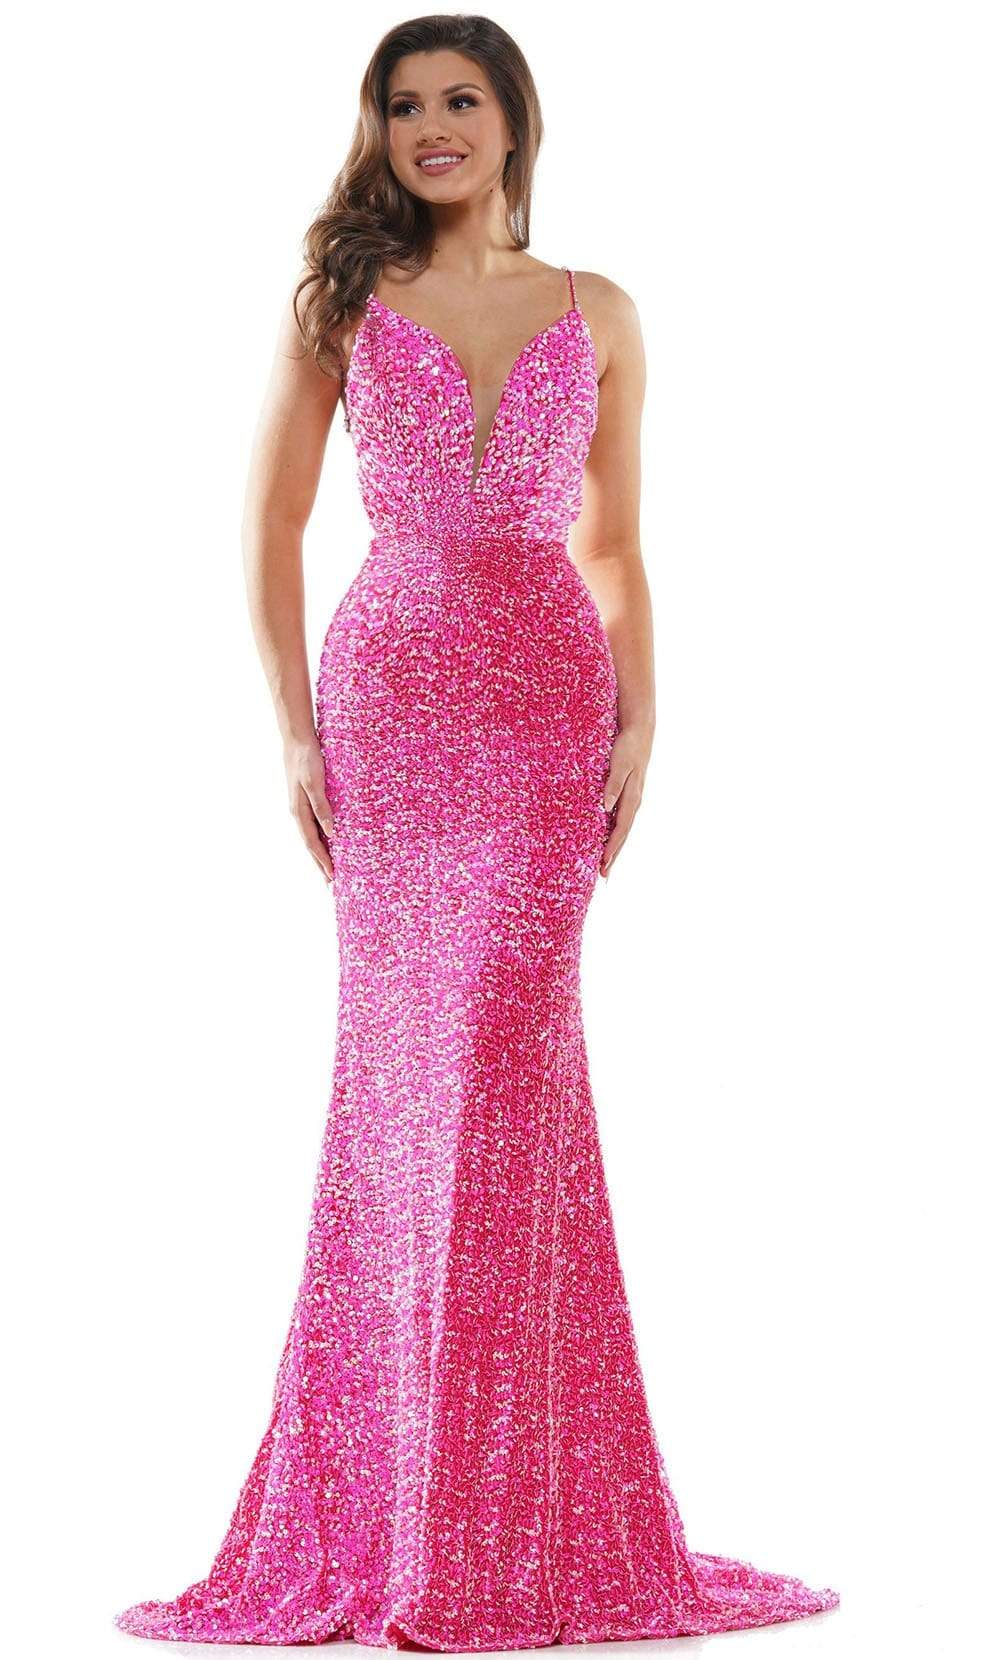 Colors Dress - 2459 Sequin Plunging Sweetheart Mermaid Dress
